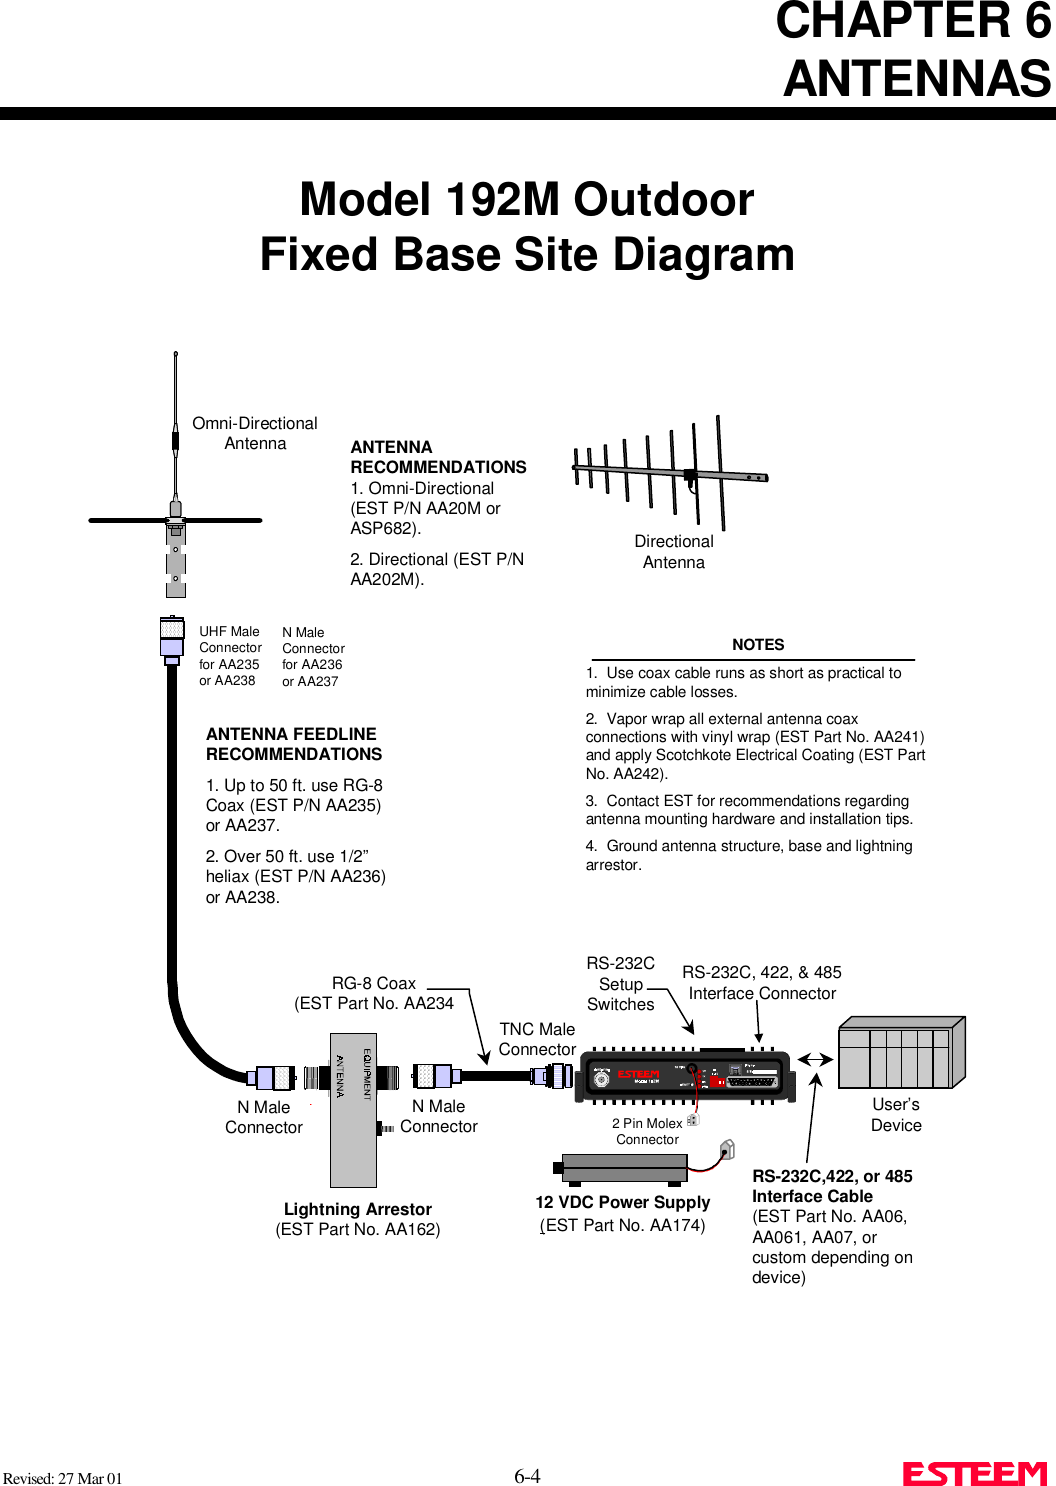 CHAPTER 6ANTENNASRevised: 27 Mar 01 6-4Model 192M OutdoorFixed Base Site DiagramN MaleConnectorN MaleConnectorTNC MaleConnector2 Pin MolexConnectorUser’sDeviceRG-8 Coax(EST Part No. AA234RS-232CSetupSwitchesRS-232C, 422, &amp; 485Interface ConnectorNOTES1.  Use coax cable runs as short as practical tominimize cable losses.2.  Vapor wrap all external antenna coaxconnections with vinyl wrap (EST Part No. AA241)and apply Scotchkote Electrical Coating (EST PartNo. AA242).3.  Contact EST for recommendations regardingantenna mounting hardware and installation tips.4.  Ground antenna structure, base and lightningarrestor.ANTENNARECOMMENDATIONS1. Omni-Directional(EST P/N AA20M orASP682).2. Directional (EST P/NAA202M).DirectionalAntennaOmni-DirectionalAntennaUHF MaleConnectorfor AA235or AA238ANTENNA FEEDLINERECOMMENDATIONS1. Up to 50 ft. use RG-8Coax (EST P/N AA235)or AA237.2. Over 50 ft. use 1/2”heliax (EST P/N AA236)or AA238.N MaleConnectorfor AA236or AA23712 VDC Power Supply(EST Part No. AA174)RS-232C,422, or 485Interface Cable(EST Part No. AA06,AA061, AA07, orcustom depending ondevice)Lightning Arrestor(EST Part No. AA162)